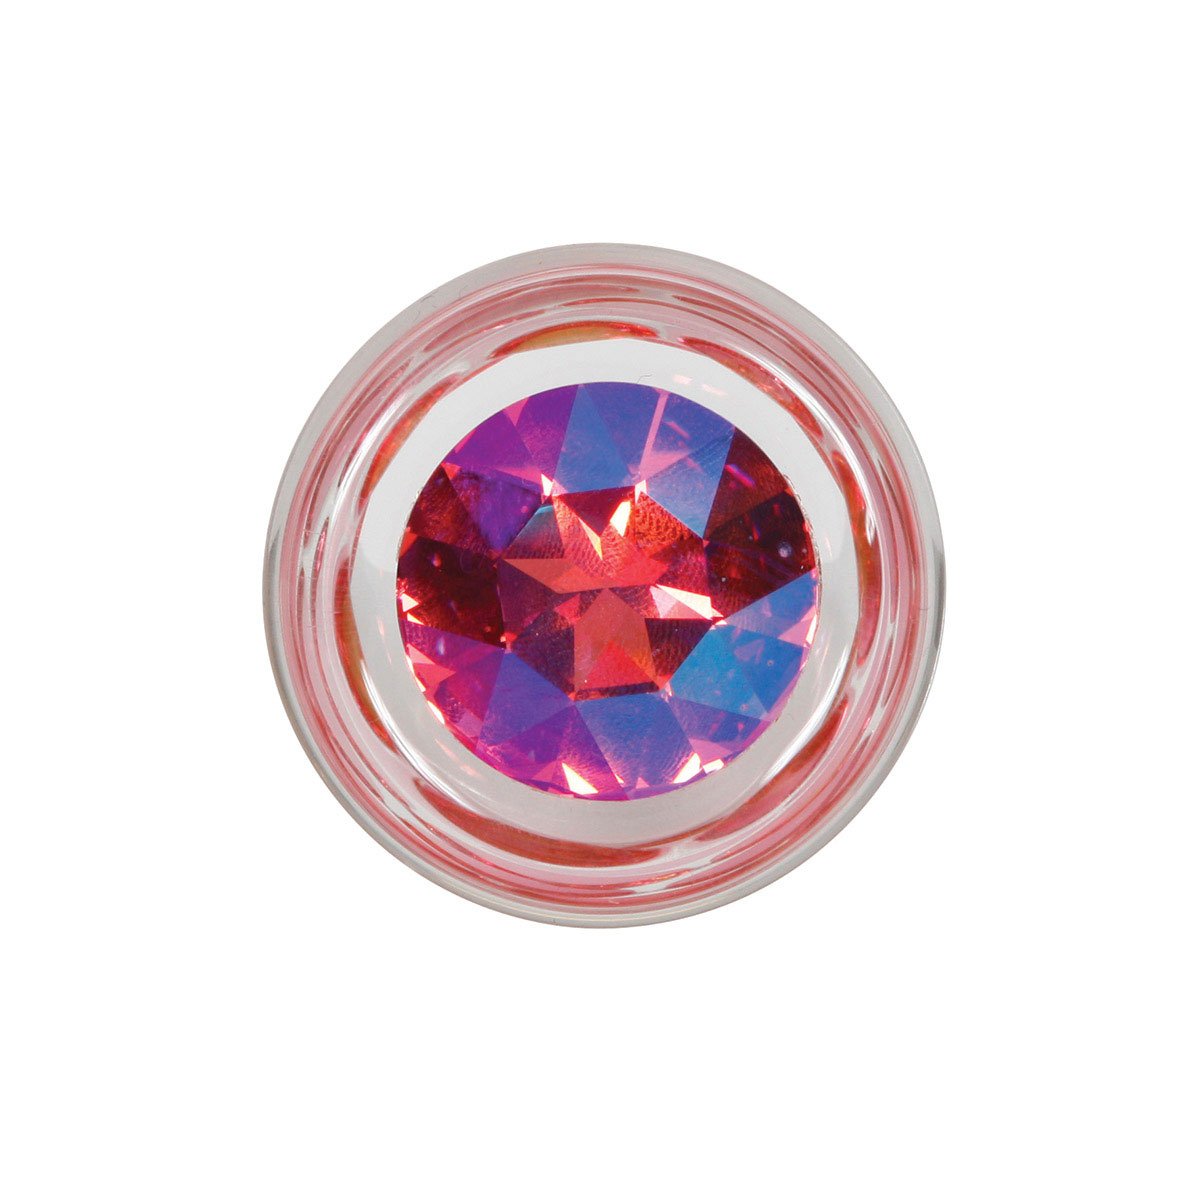 Crystal Delights Pineapple Delight Plug Pink Crystal - Buy At Luxury Toy X - Free 3-Day Shipping